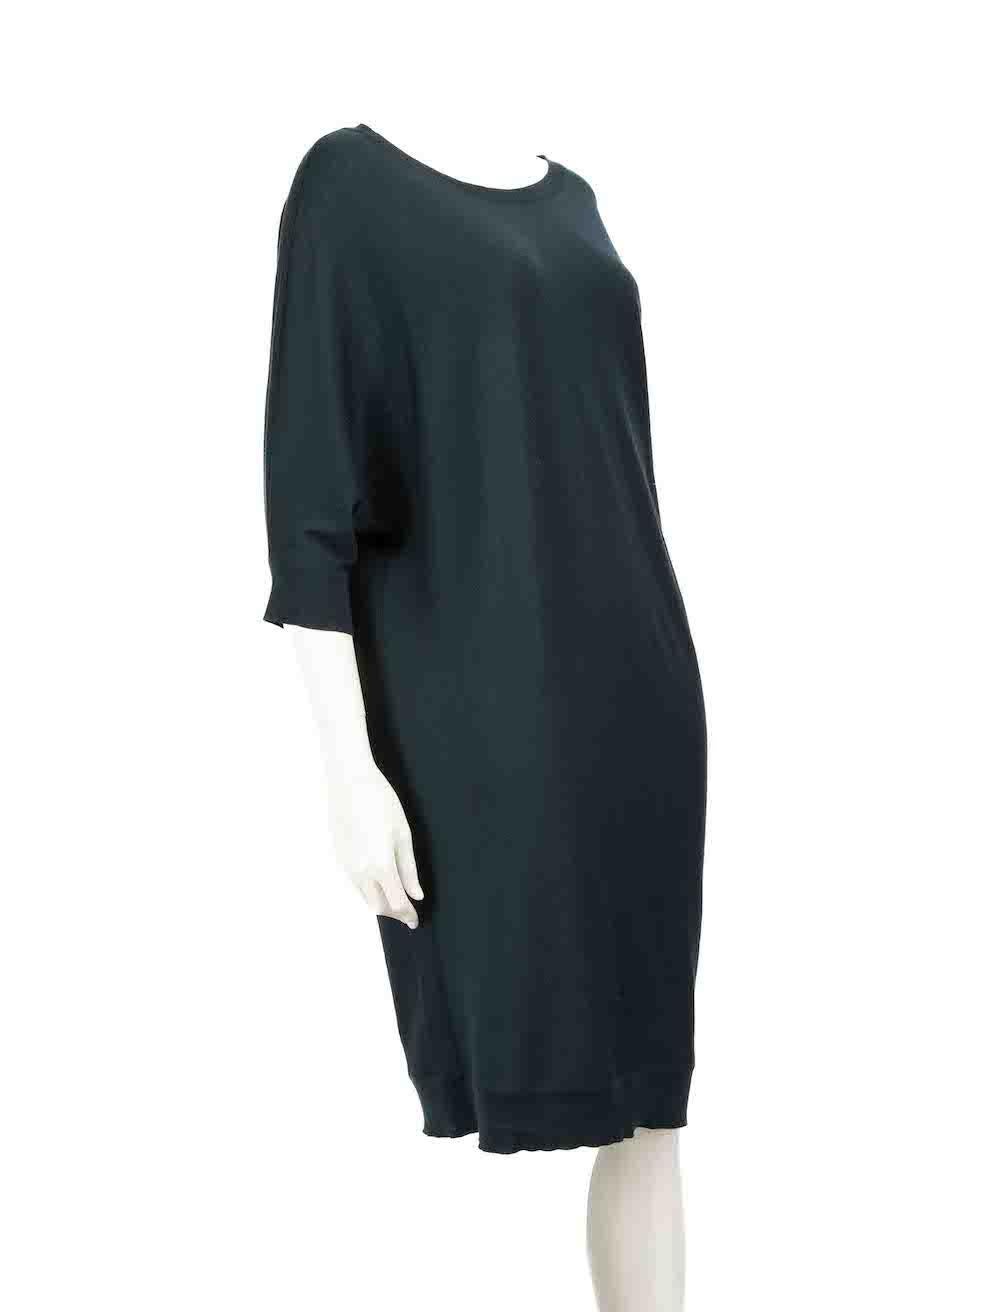 CONDITION is Very good. Minimal wear to dress is evident. Minimal wear to the front is seen with piling along with pulls to the weave on this used Alexander McQueen designer resale item.
 
 
 
 Details
 
 
 Green
 
 Wool
 
 Knit dress
 
 Knee